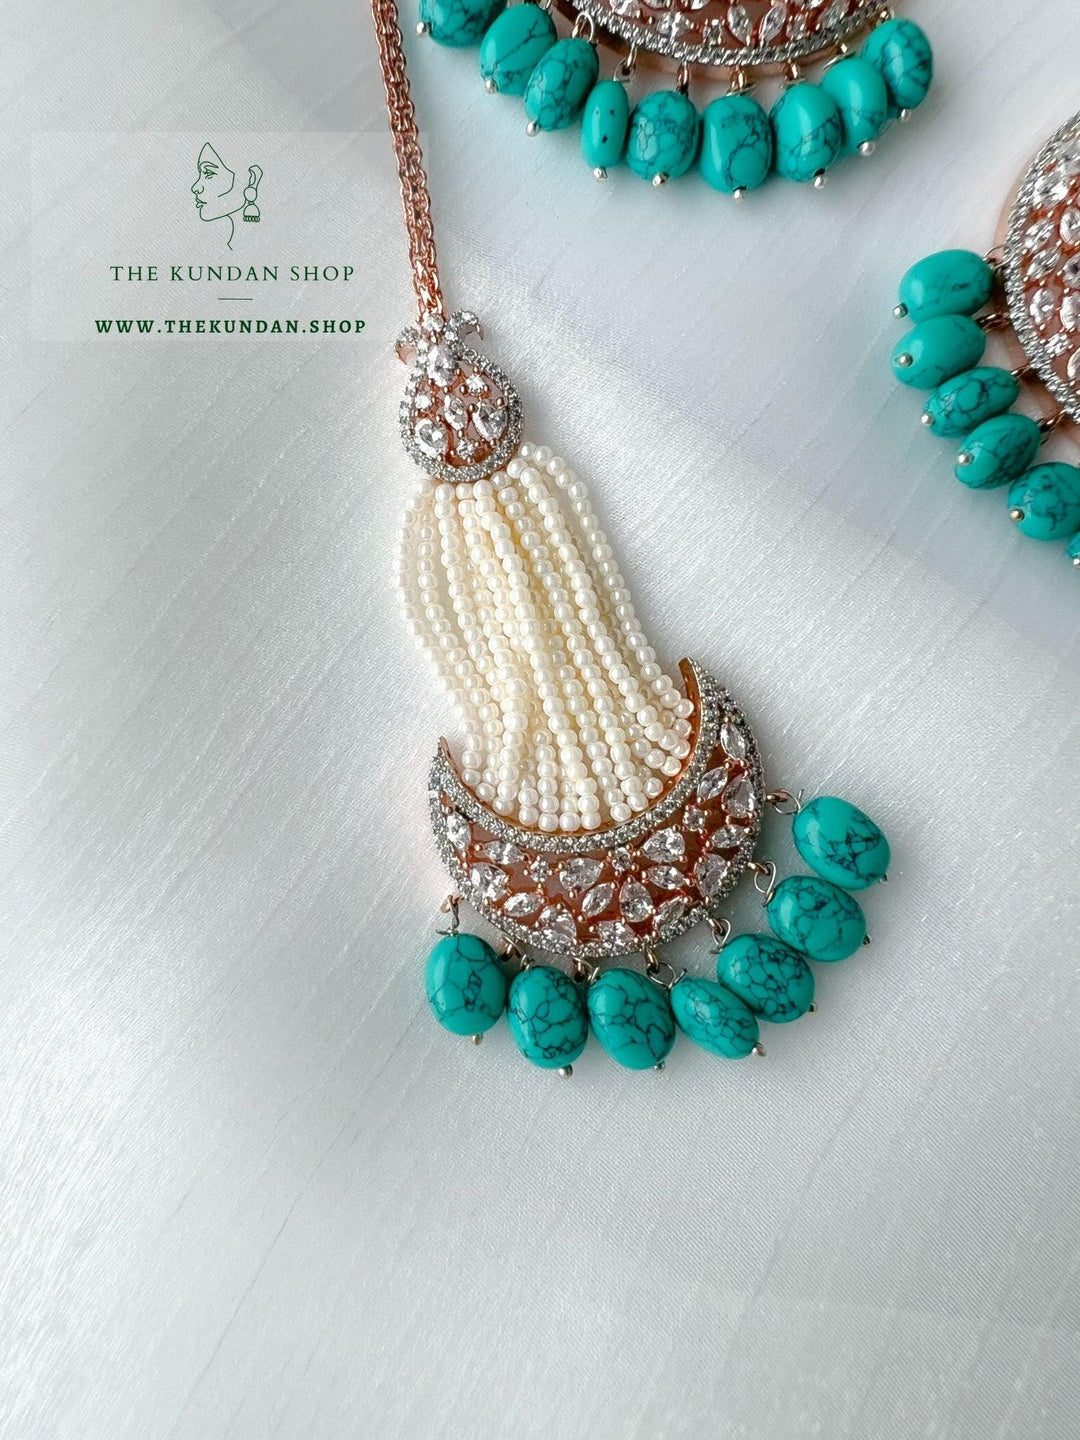 Expressive in Rose Gold in Turquoise Earrings + Tikka THE KUNDAN SHOP 